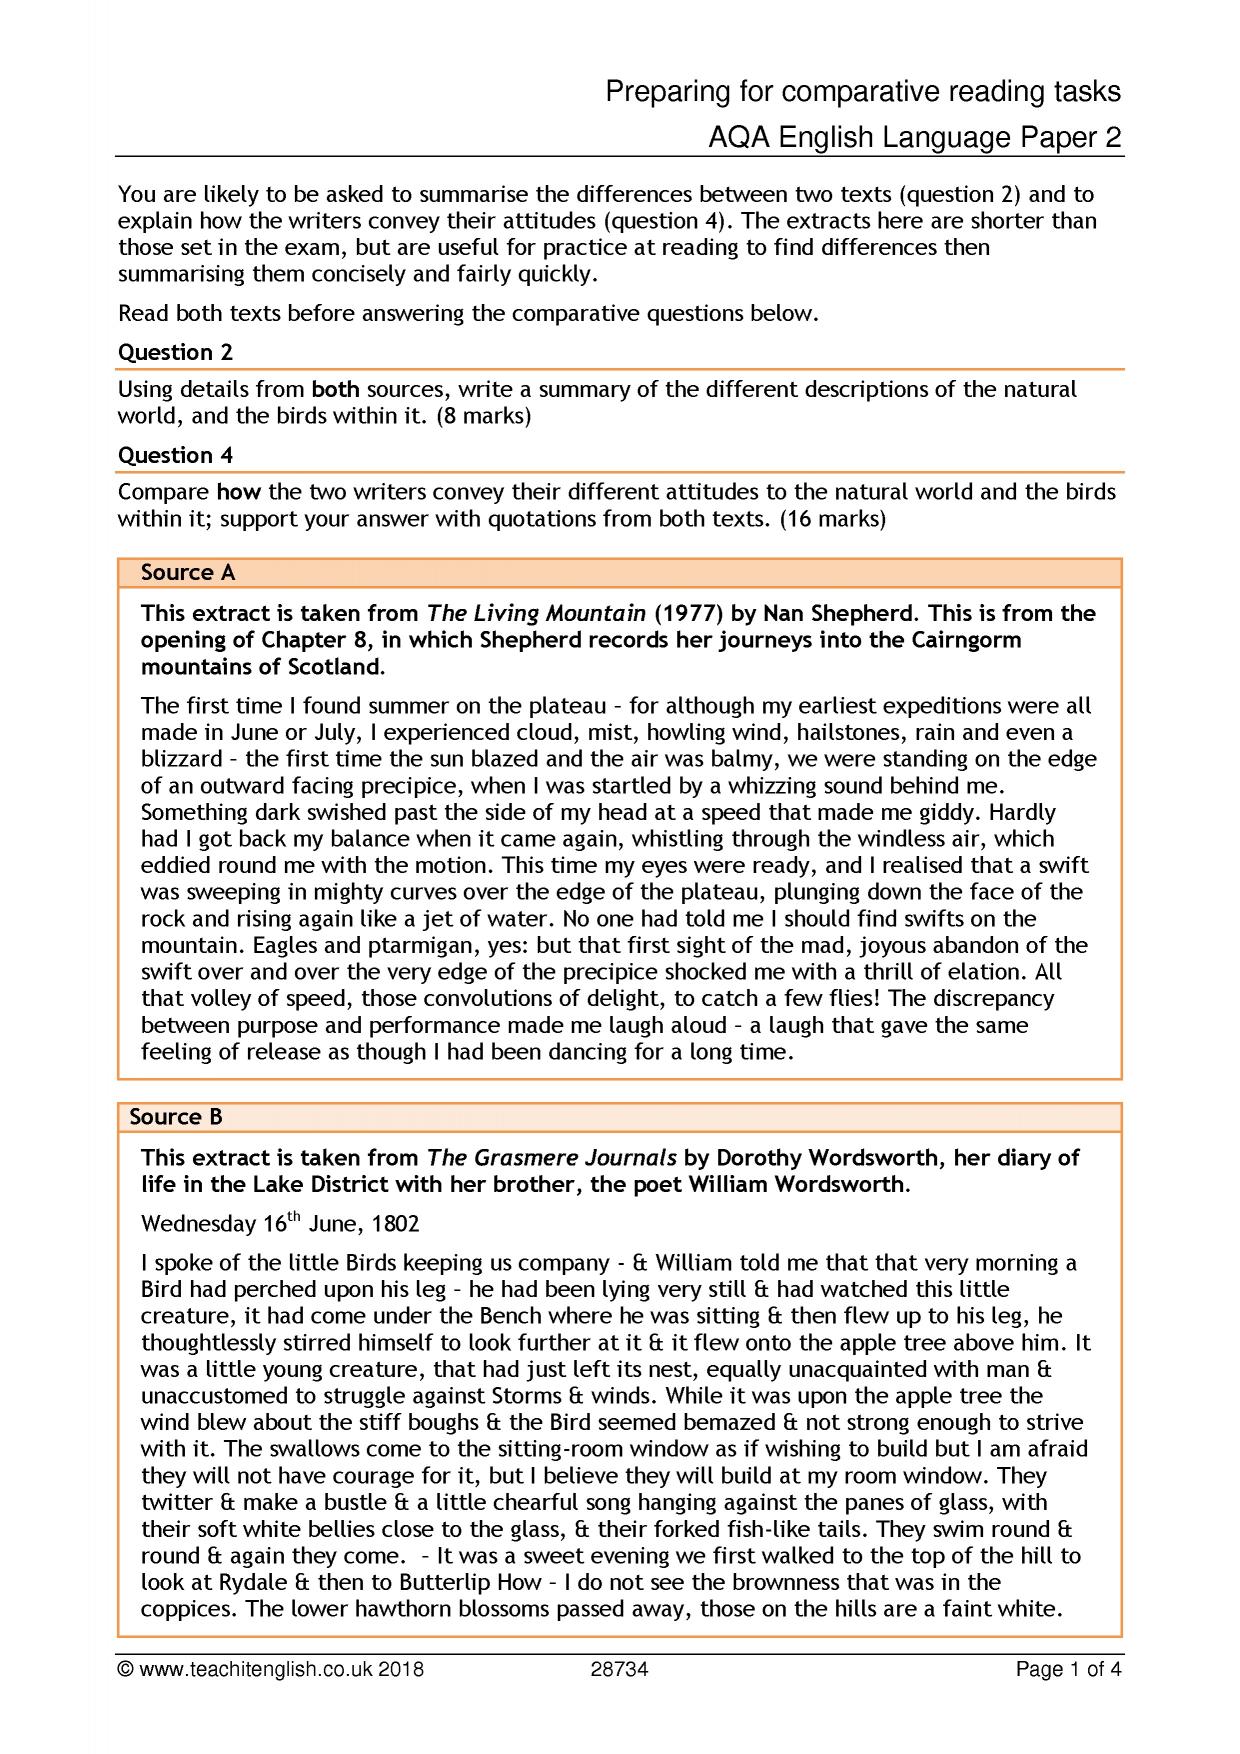 Aqa Gcse English Language Paper 2 Practice For Questions 2 And 4